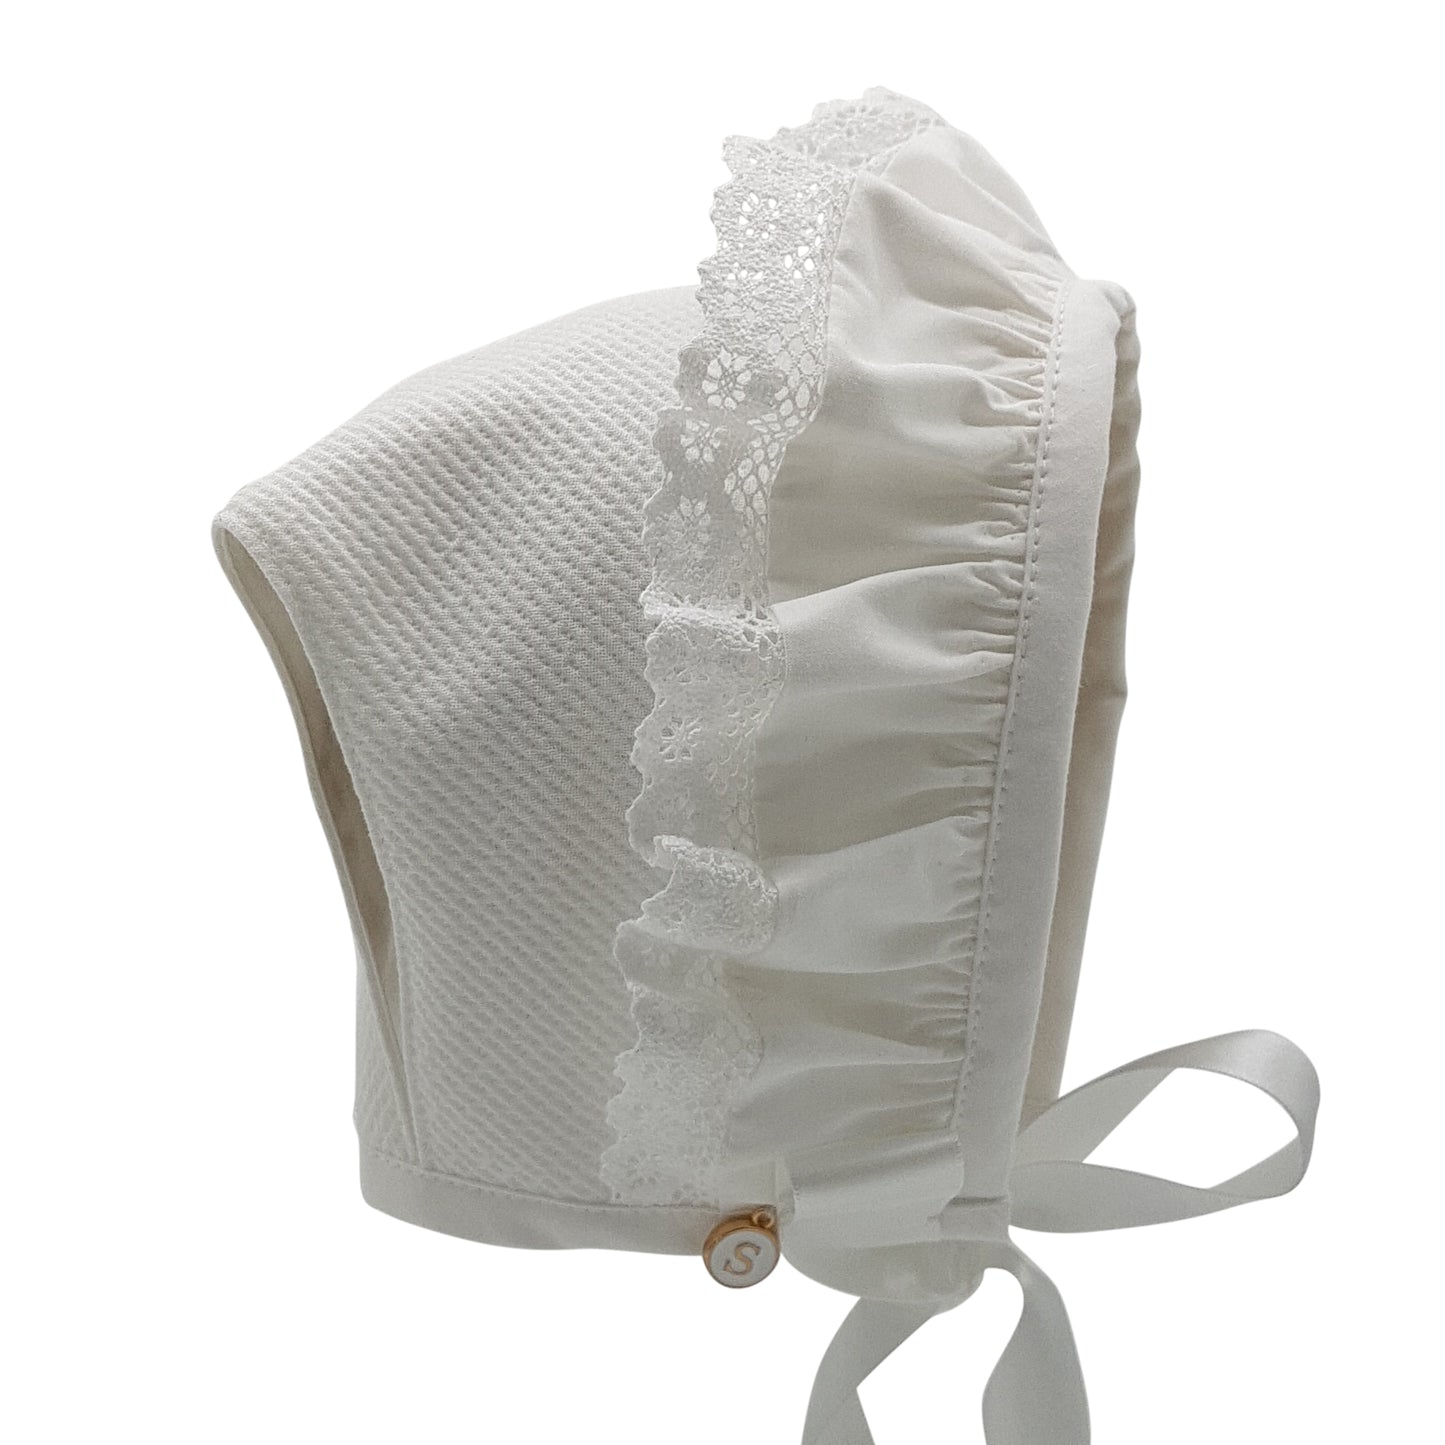 Exclusive Bonnet, White Jacquard T-Bar Style with frill & cluny lace